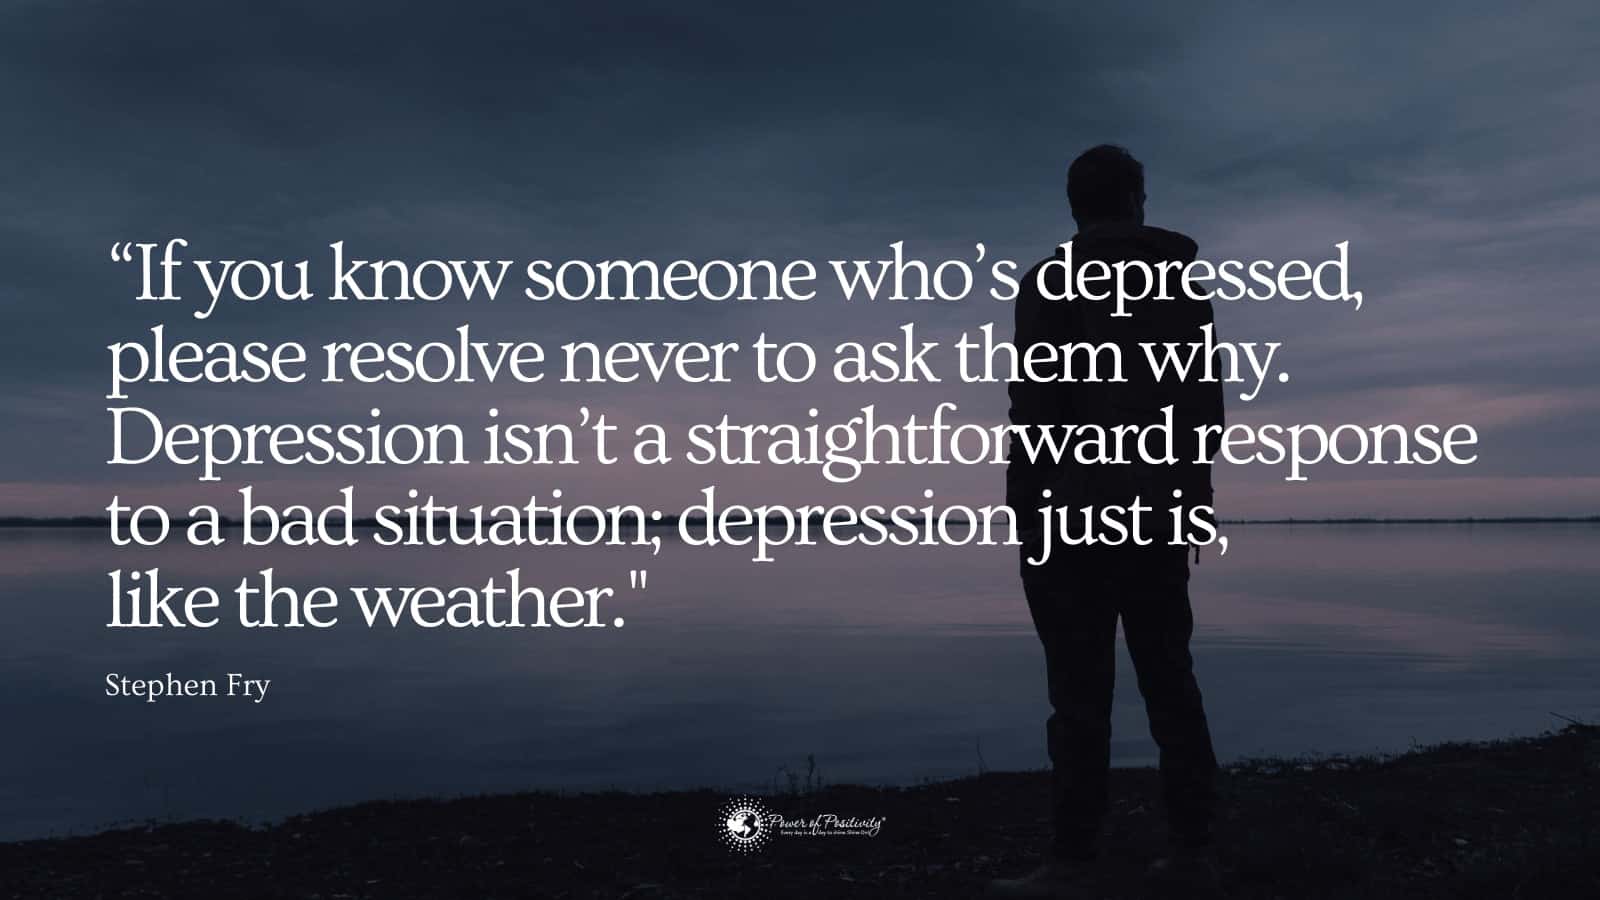 15 Quotes on Depression to Give You Perspective